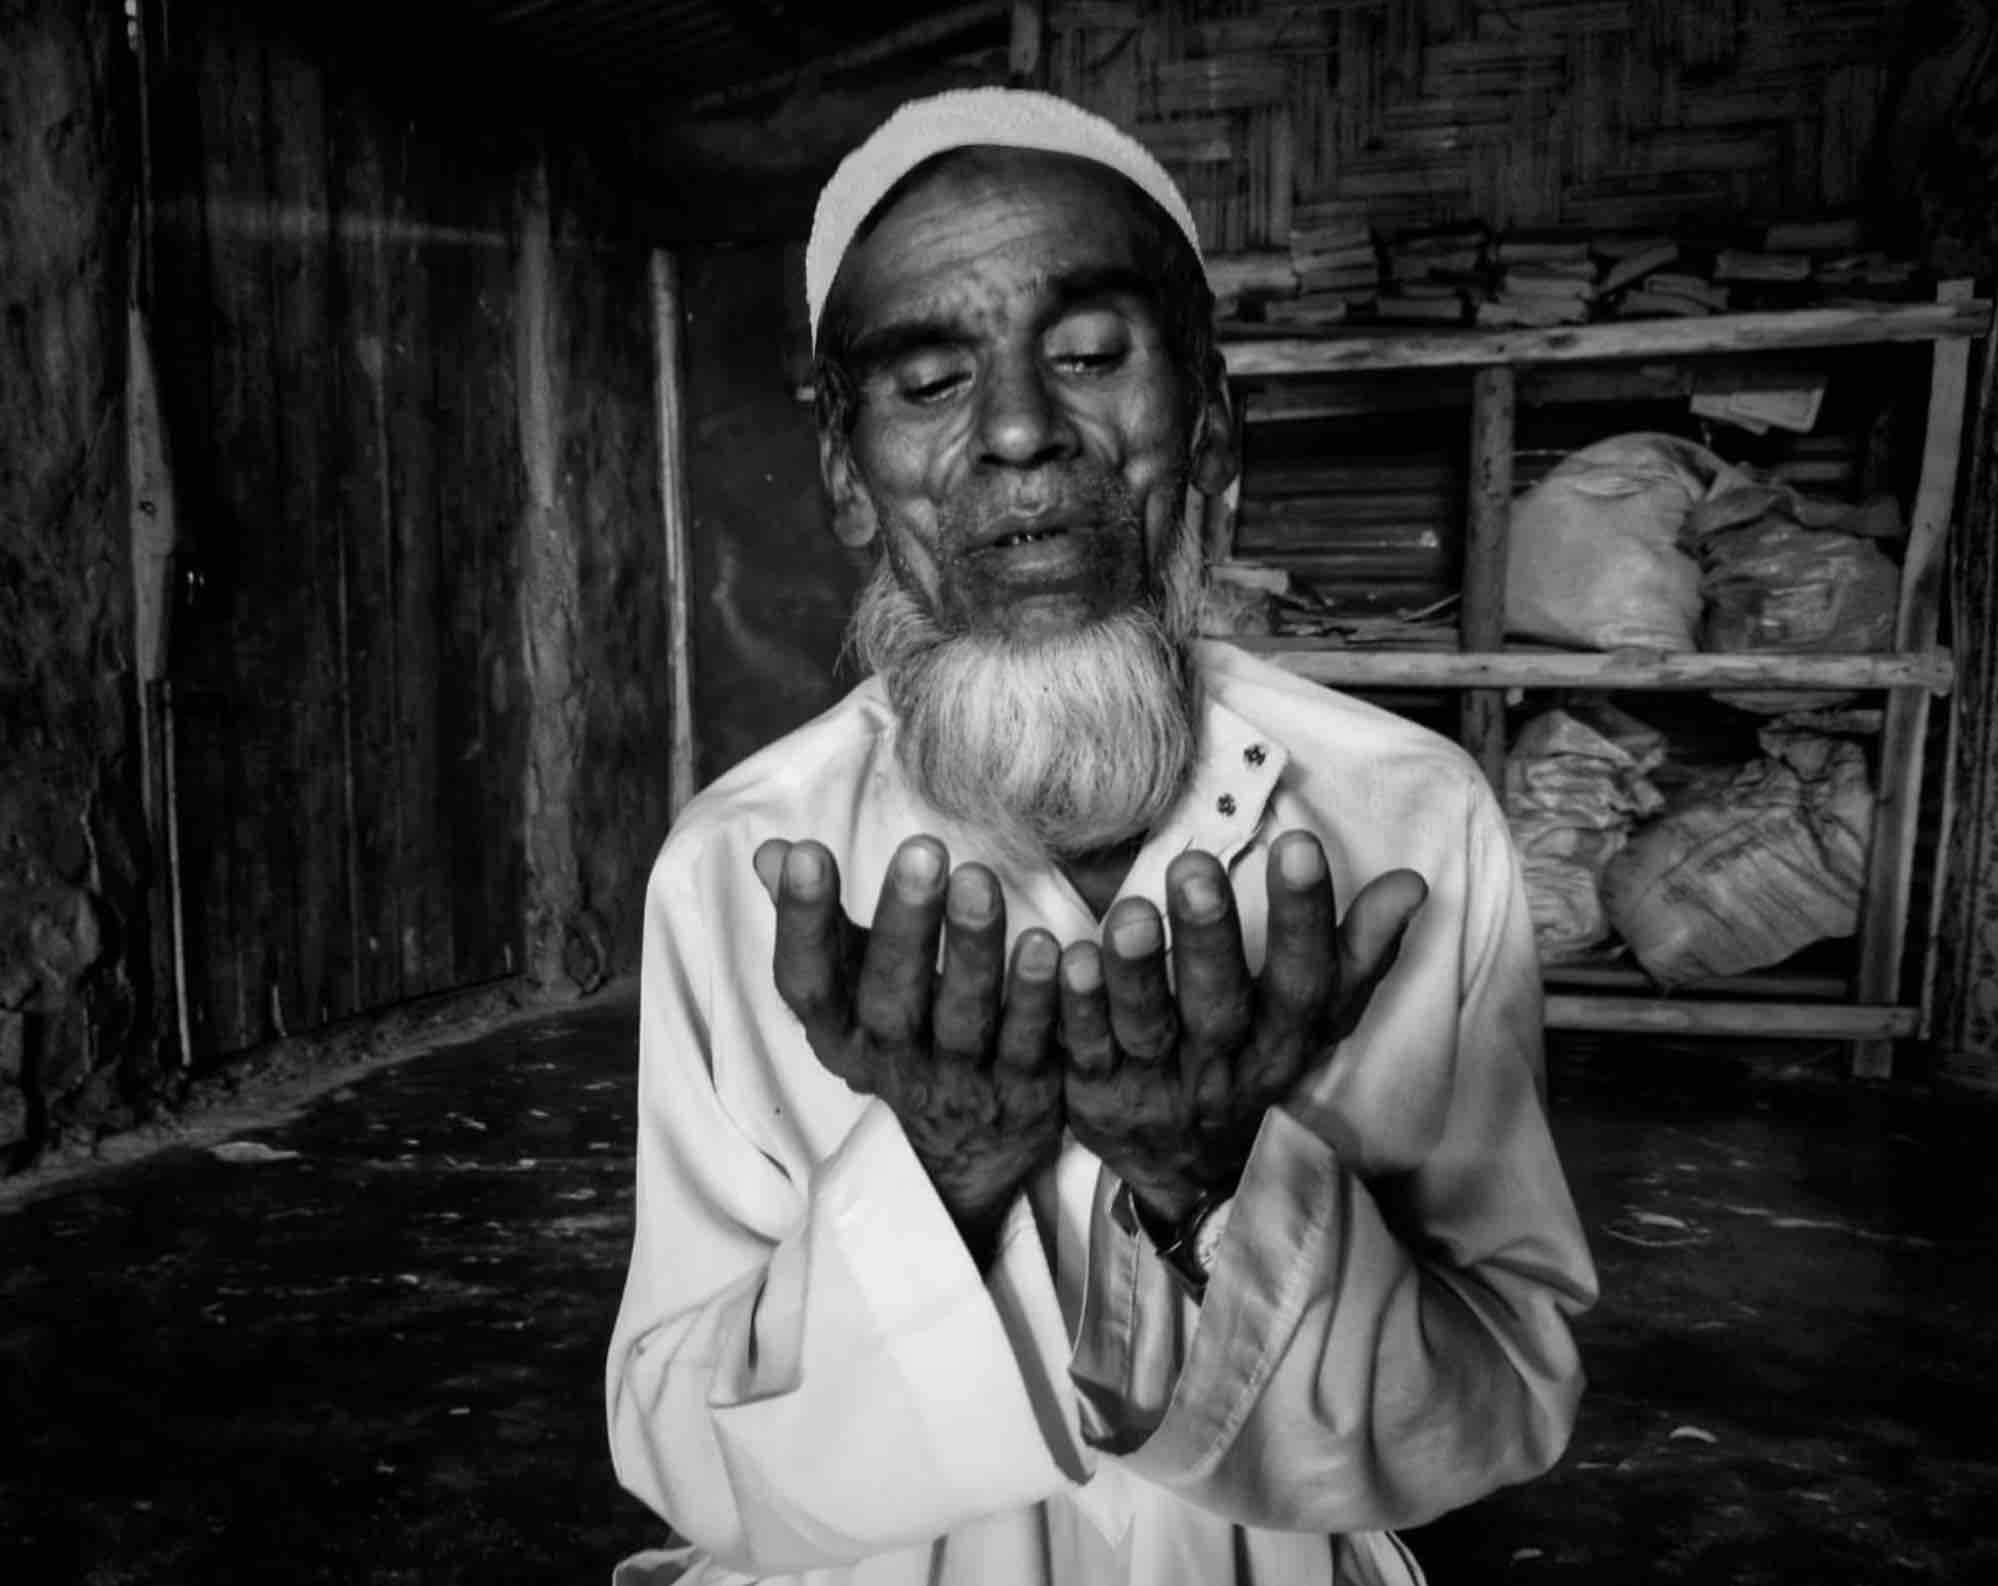 This photo won the Golam Subhahan First prize for Haider Ali.